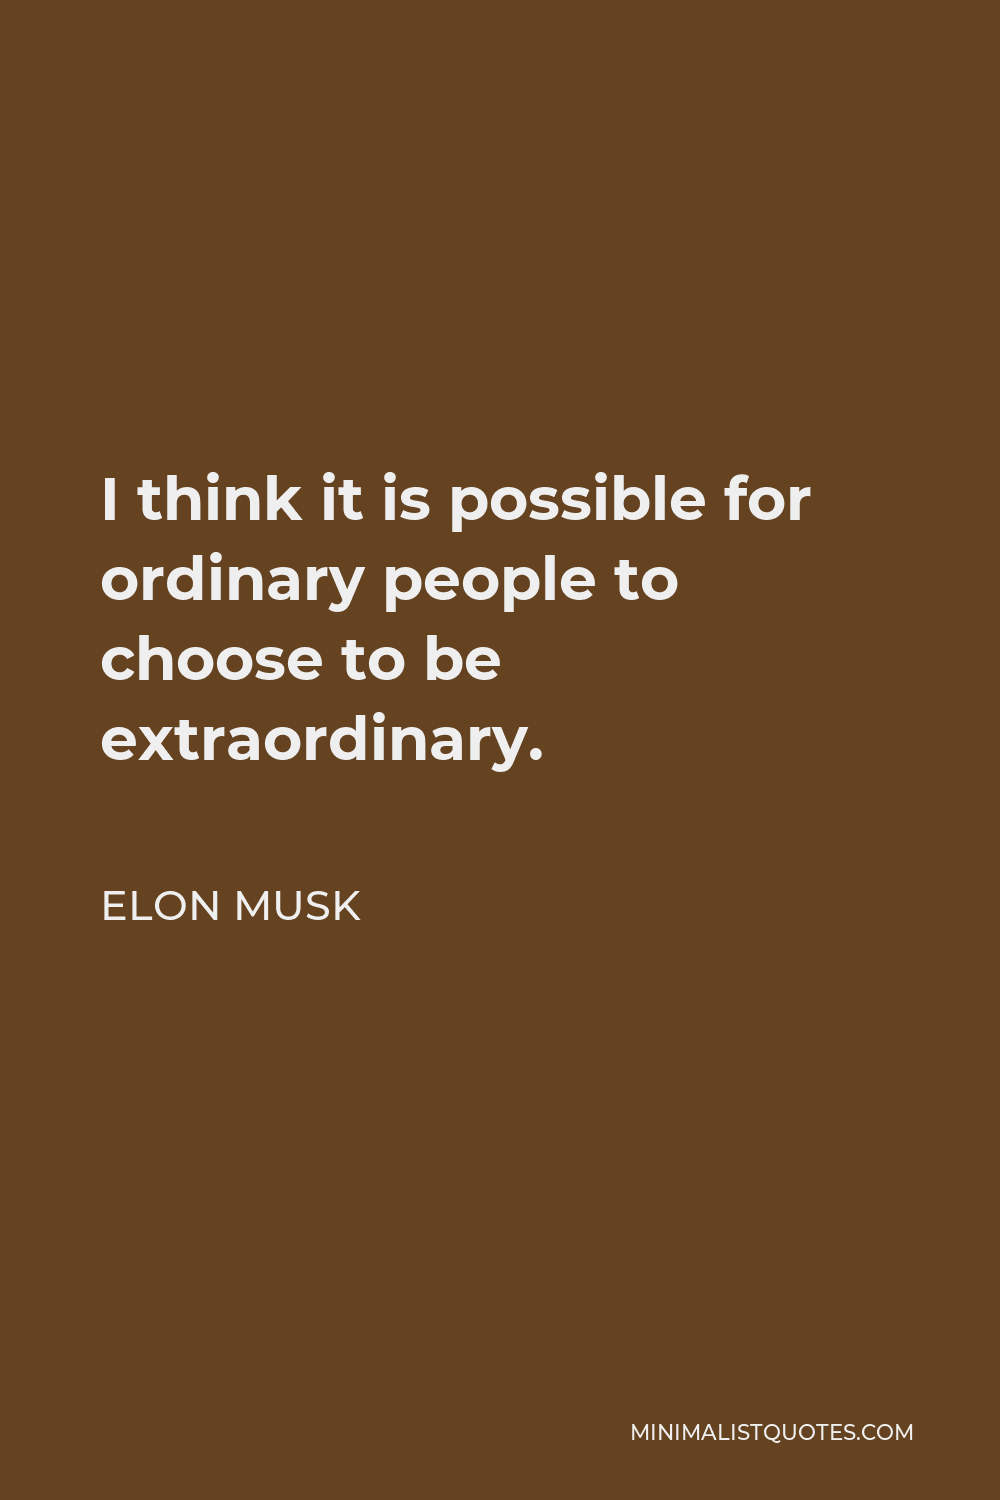 Elon Musk Quote - I think it is possible for ordinary people to choose to be extraordinary.